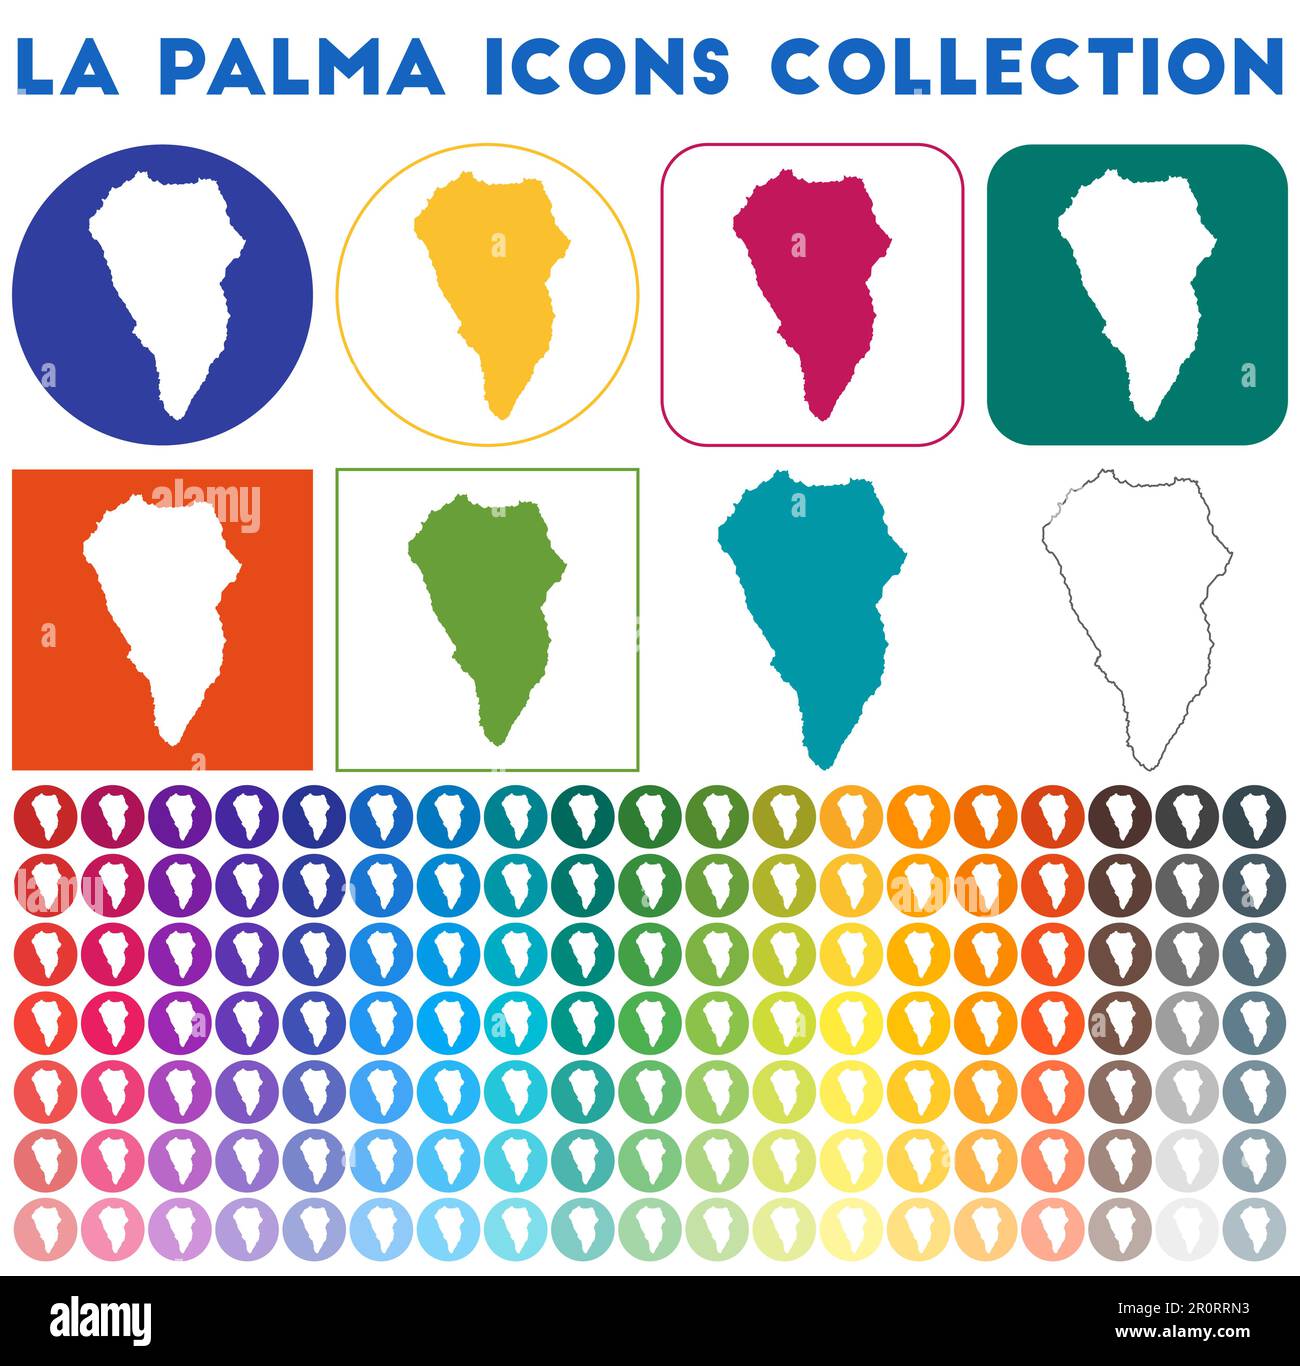 La Palma icons collection. Bright colourful trendy map icons. Modern La Palma badge with island map. Vector illustration. Stock Vector